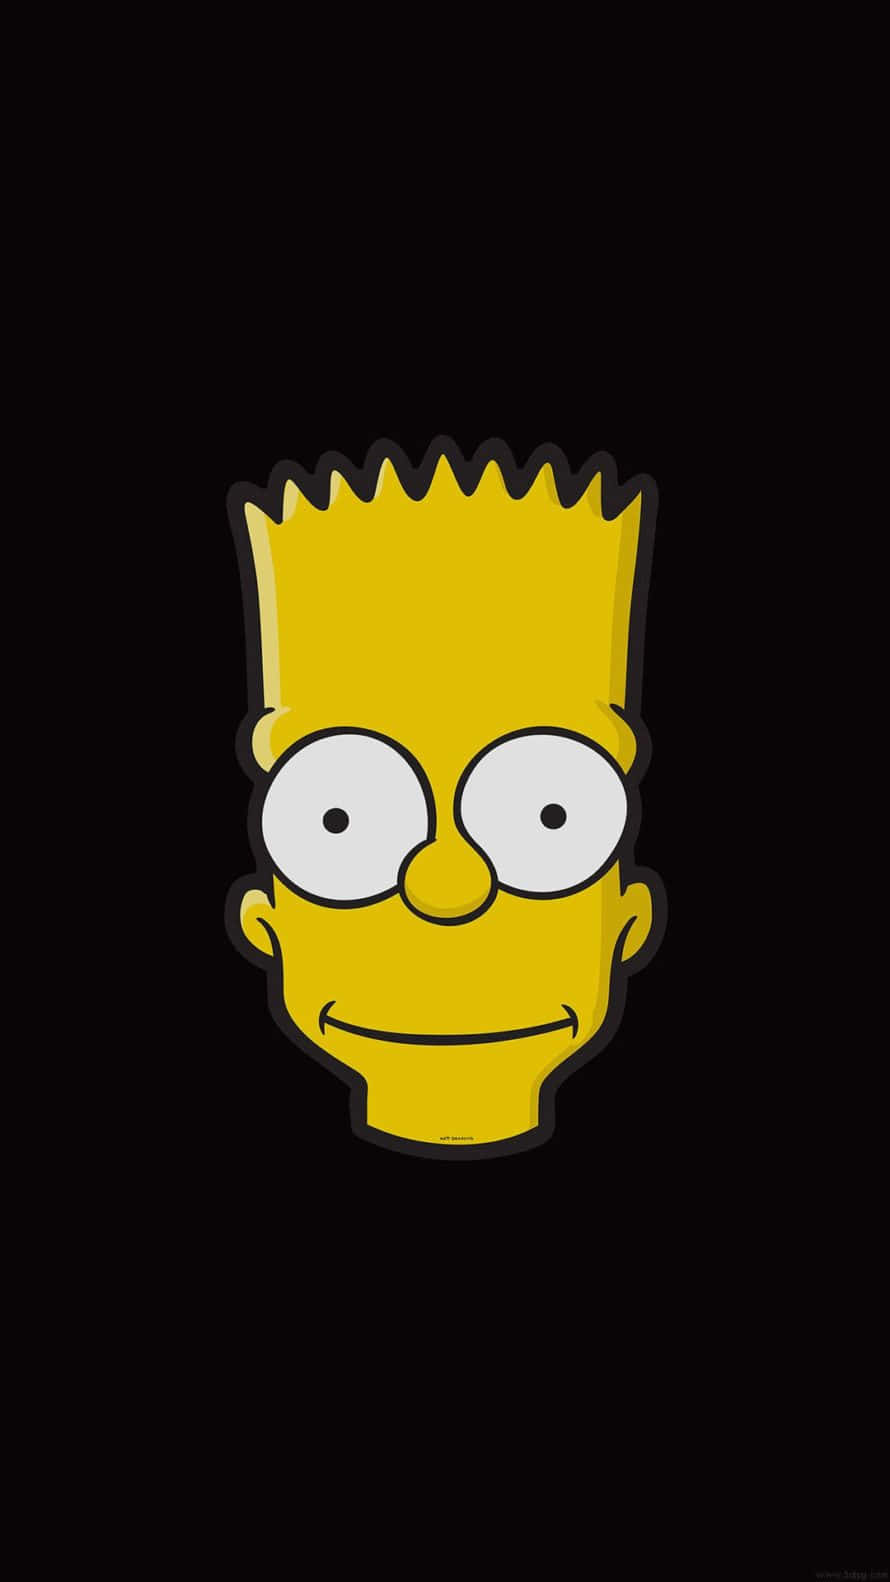 The Simpsons Face On A Black Background Wallpaper